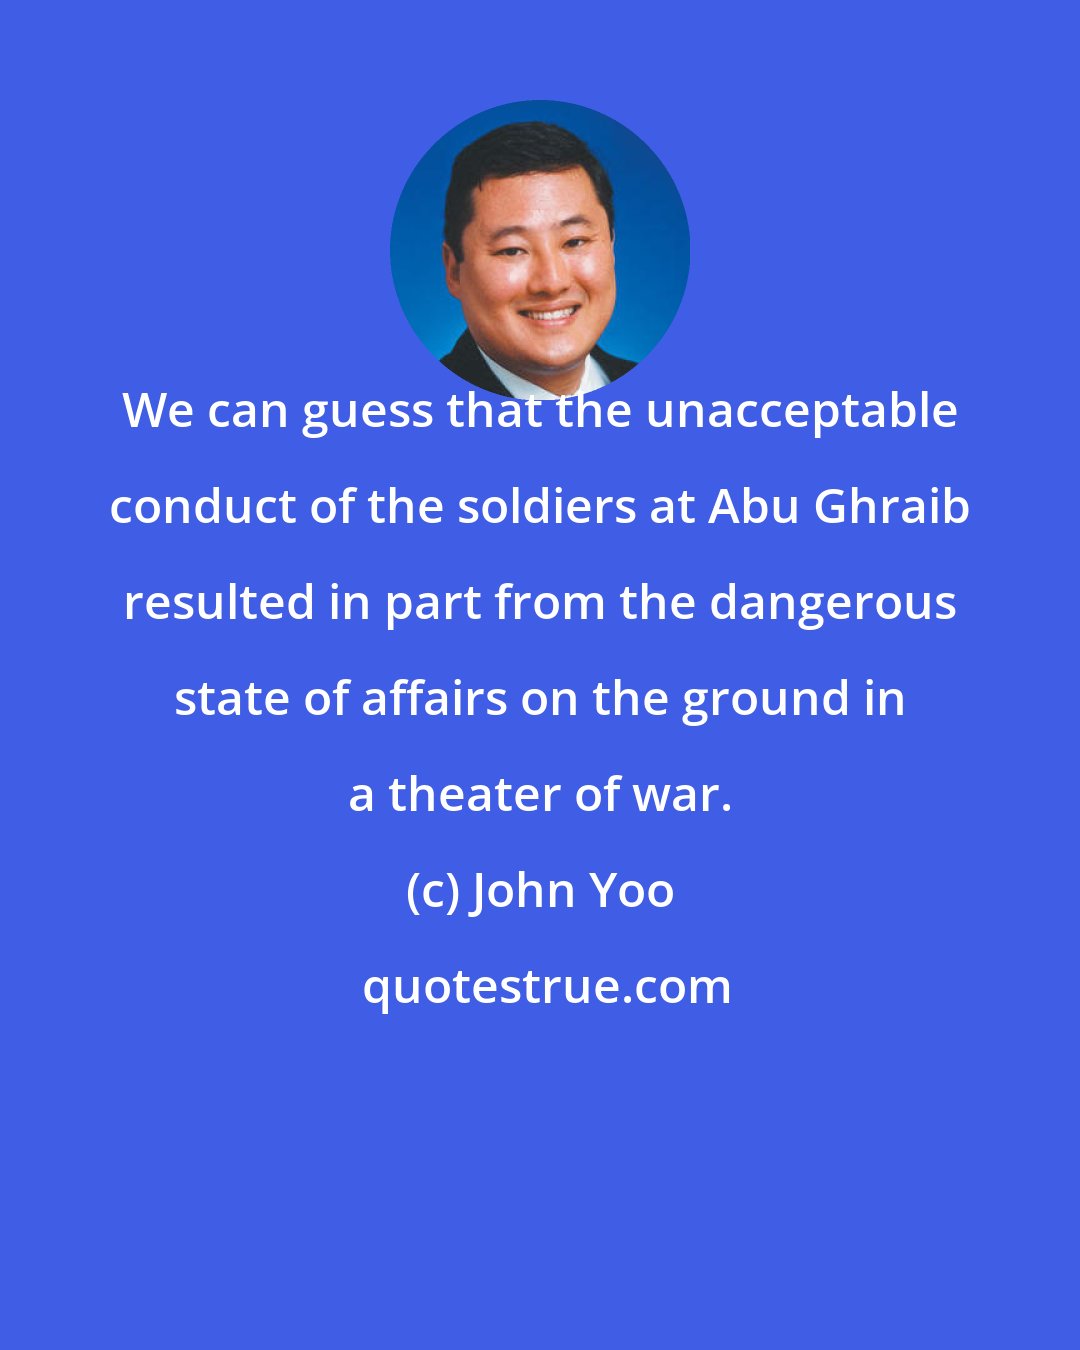 John Yoo: We can guess that the unacceptable conduct of the soldiers at Abu Ghraib resulted in part from the dangerous state of affairs on the ground in a theater of war.